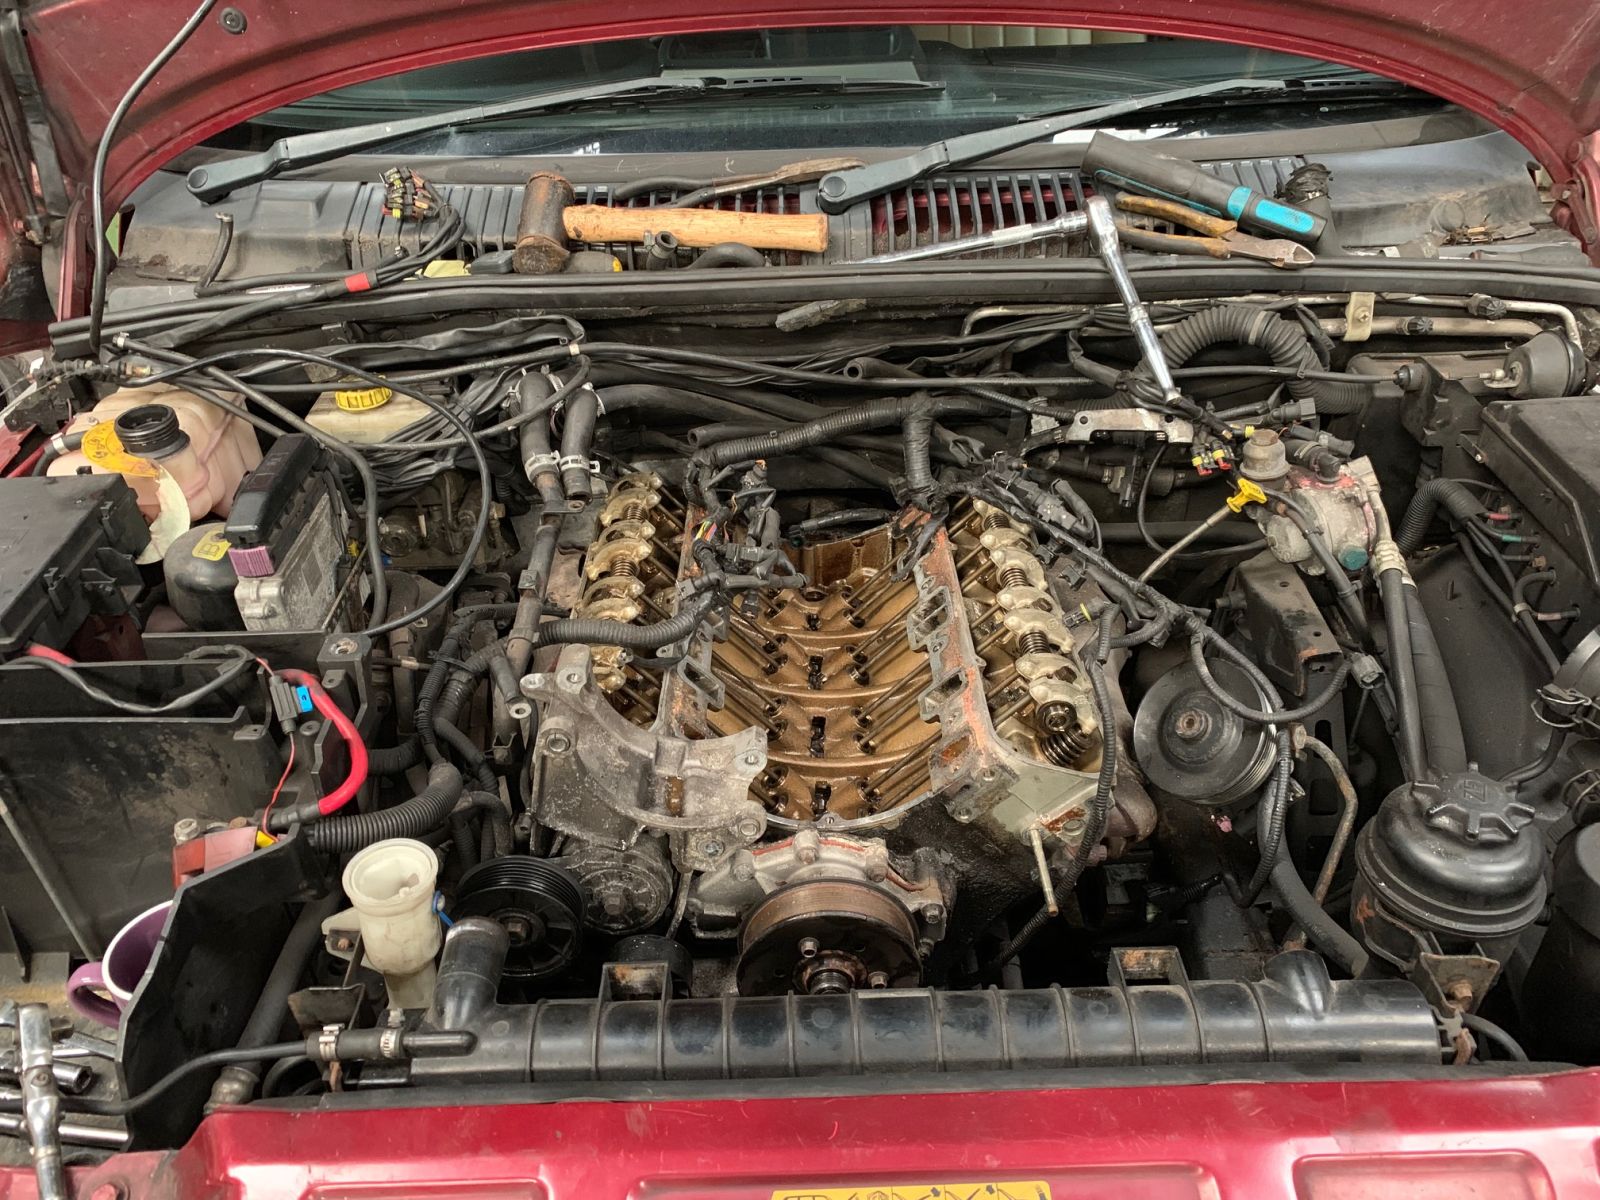 It’s not the head gaskets, but you can see them from here. Oh, actually, no you can’t.